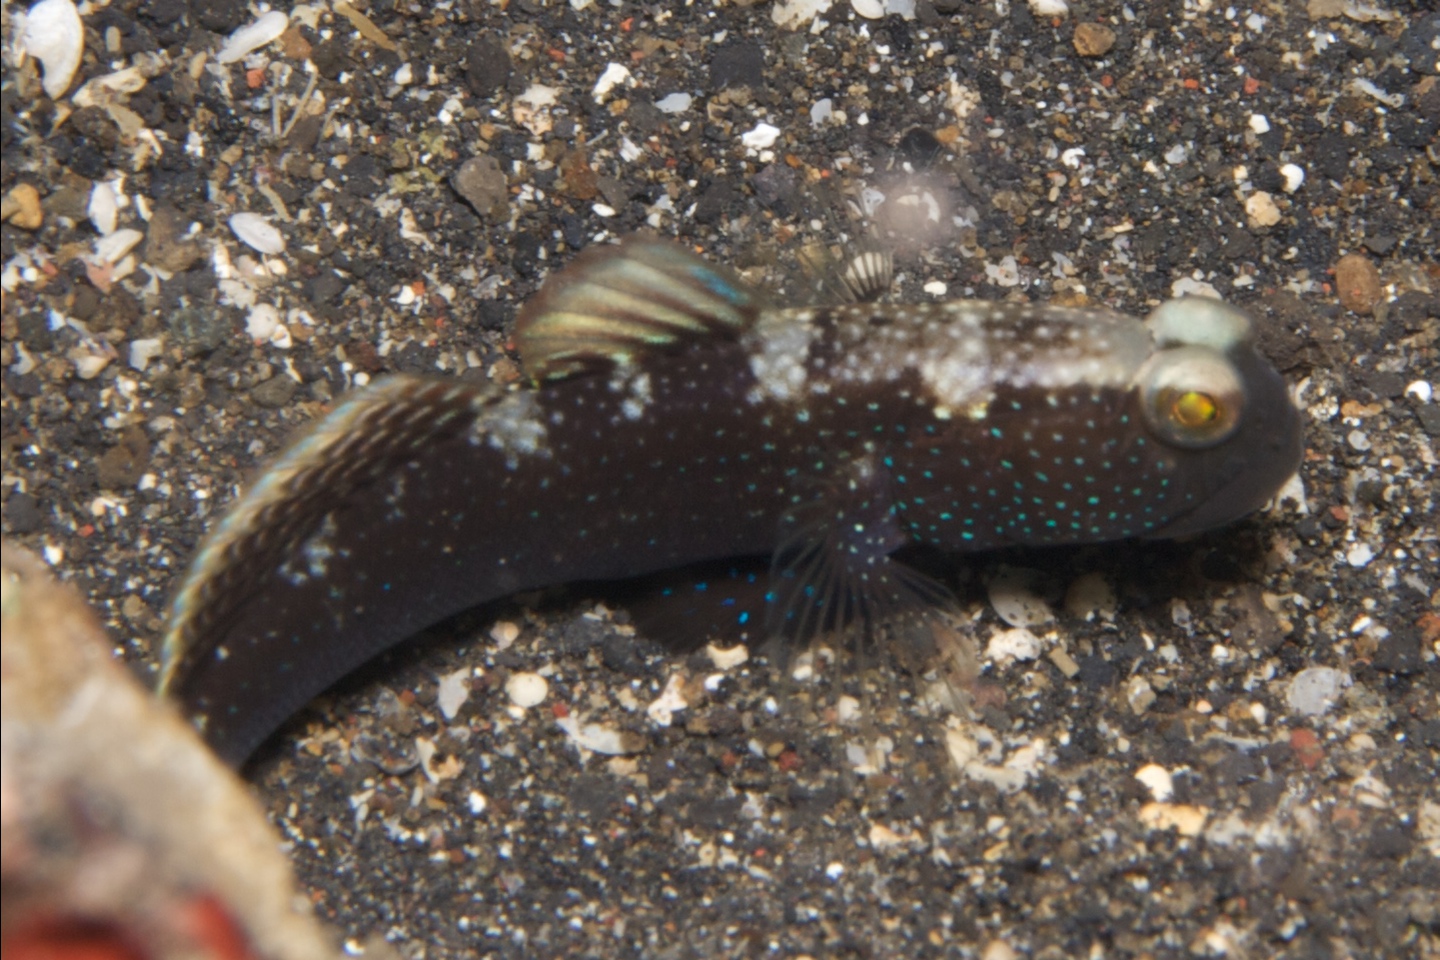 Barred shrimpgoby